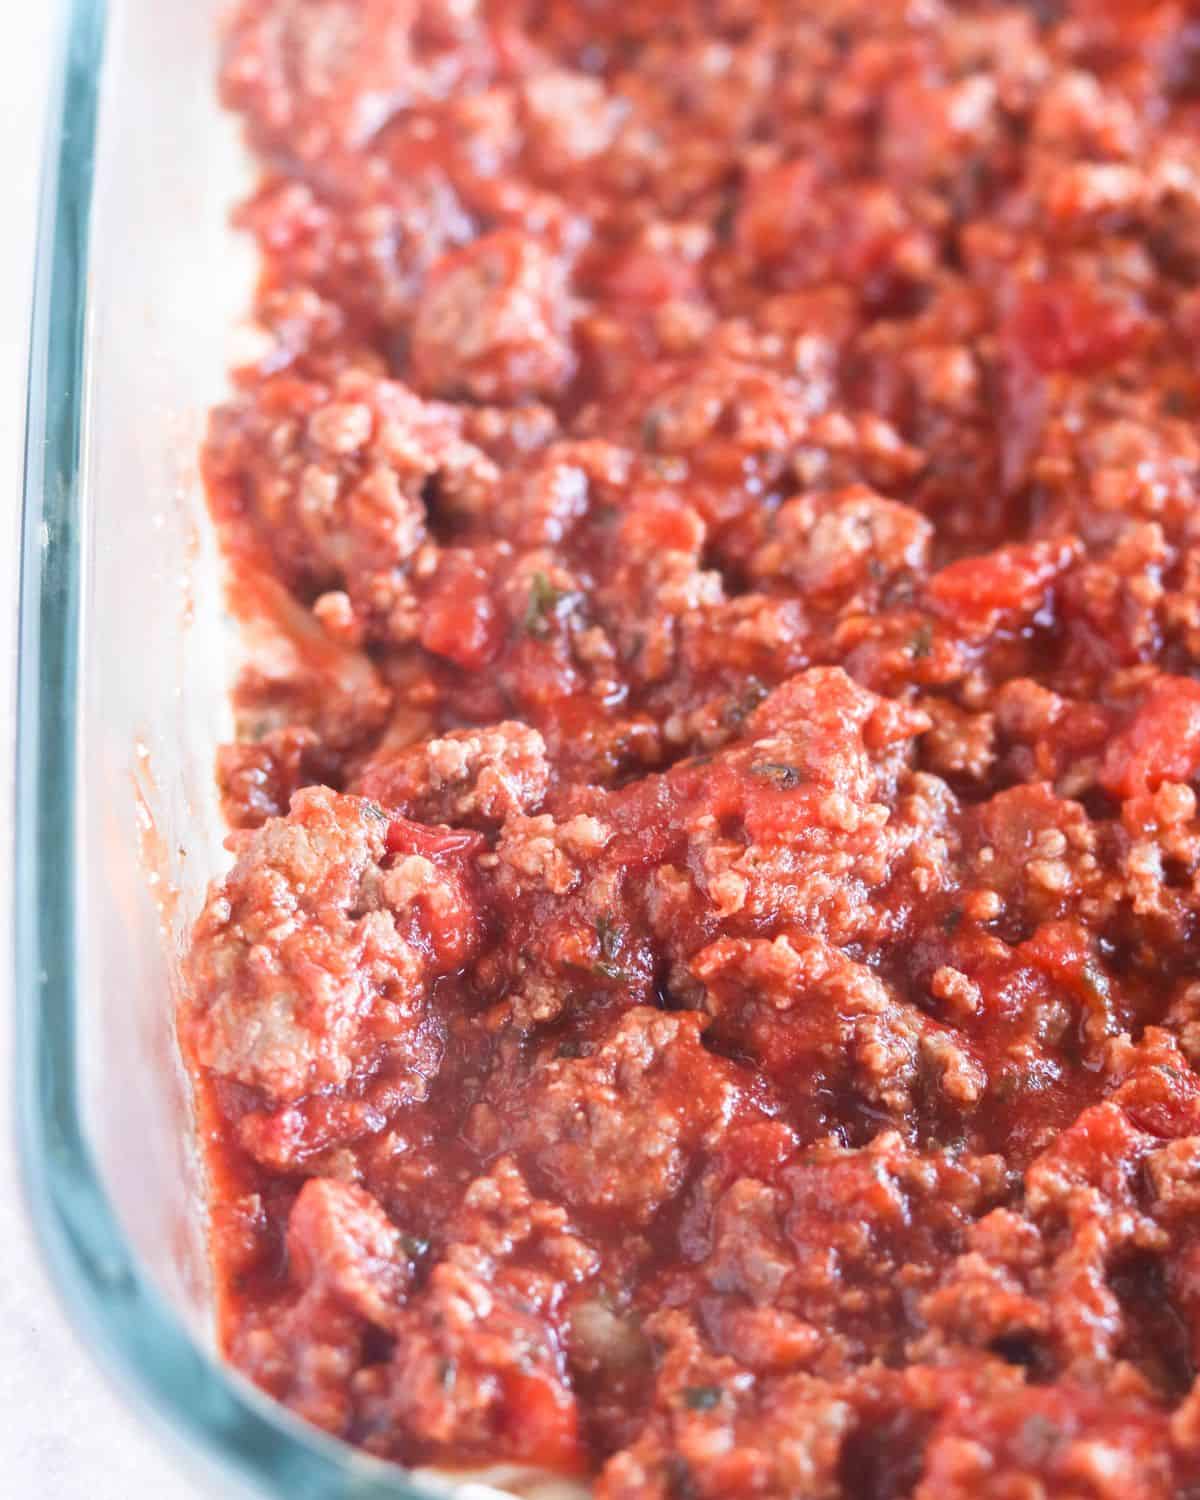 meat sauce layer over the mozzarella cheese.